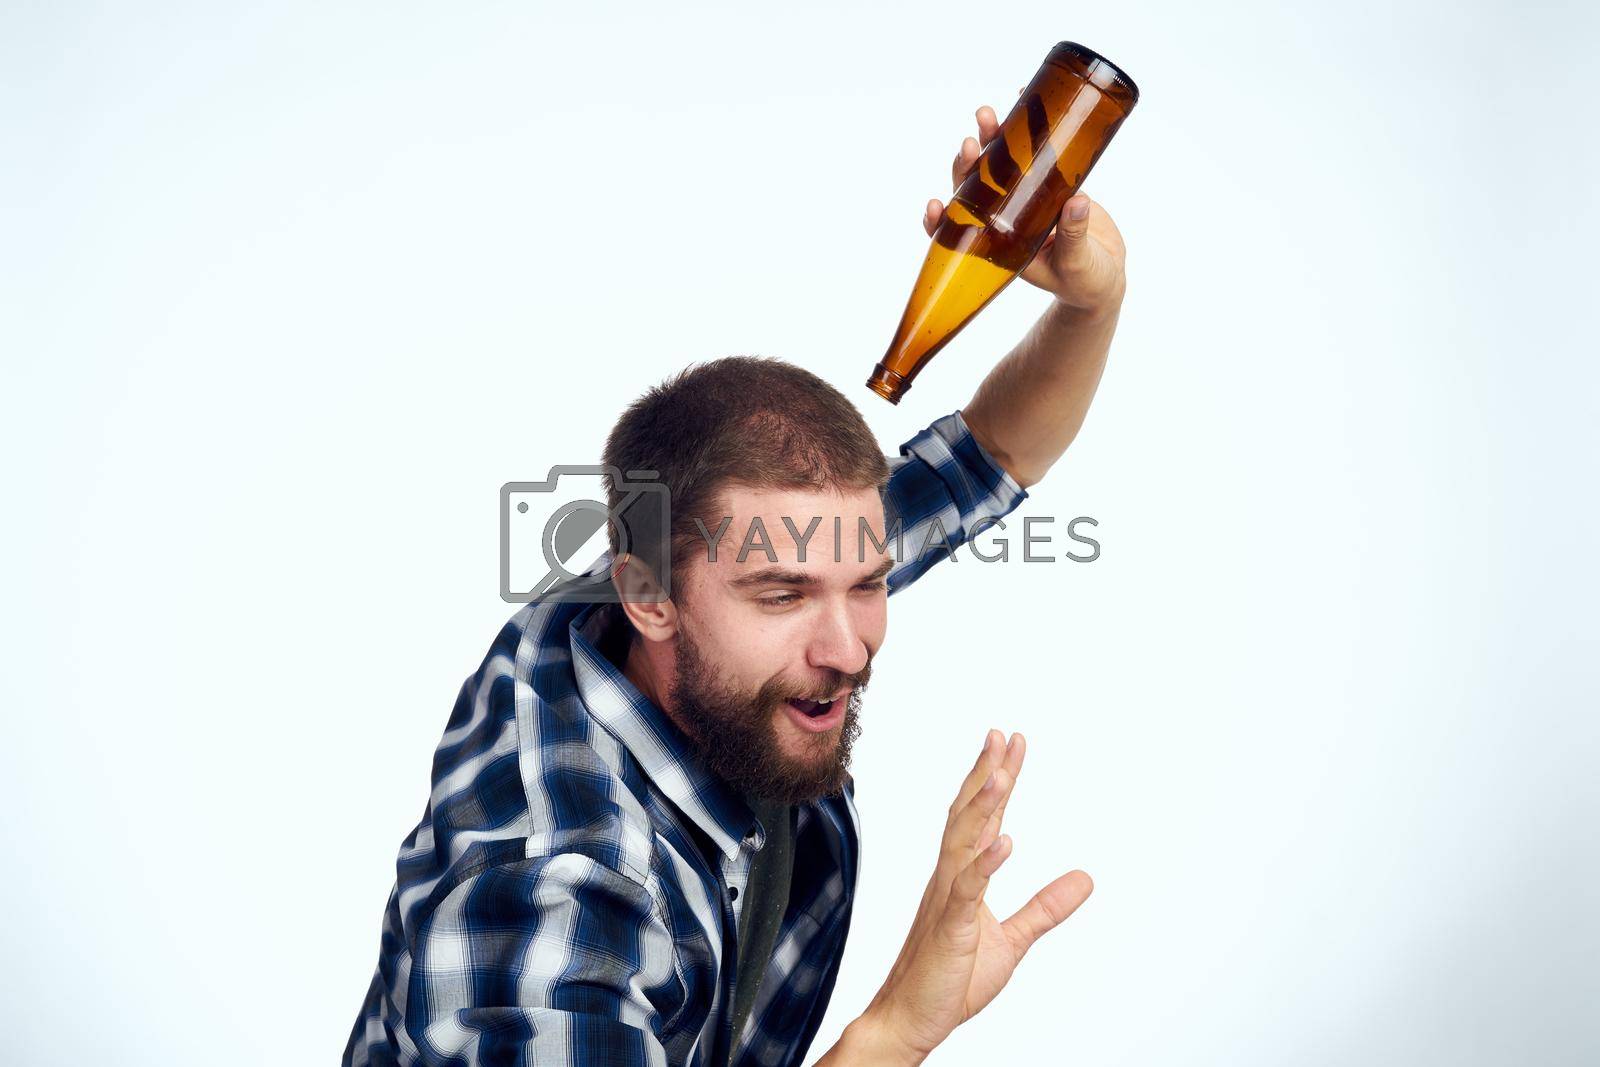 Royalty free image of drunk man alcoholism problems emotions depression isolated background by Vichizh